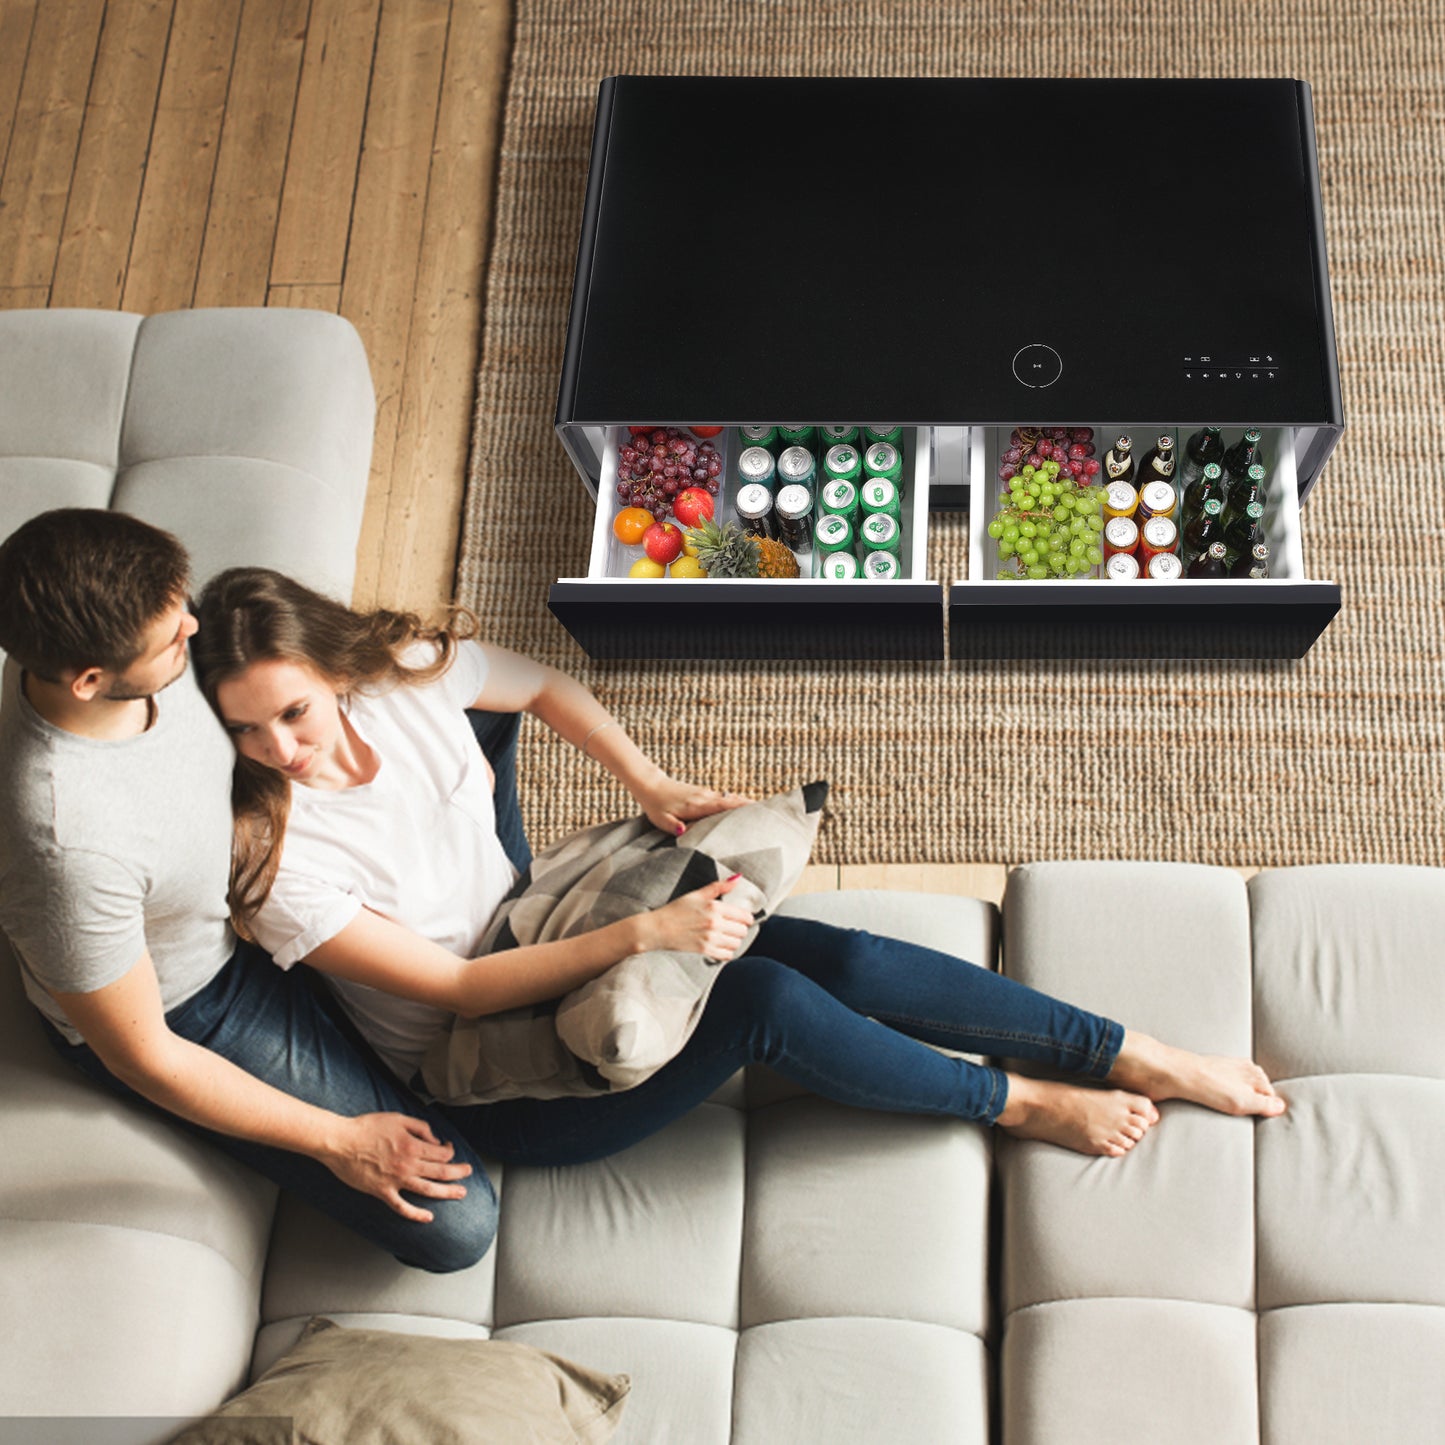 Modern Smart Coffee Table with Built-in Fridge; Bluetooth Speaker; Wireless Charging Module; Touch Control Panel; Power Socket; USB Interface; Outlet Protection; Atmosphere light; and More